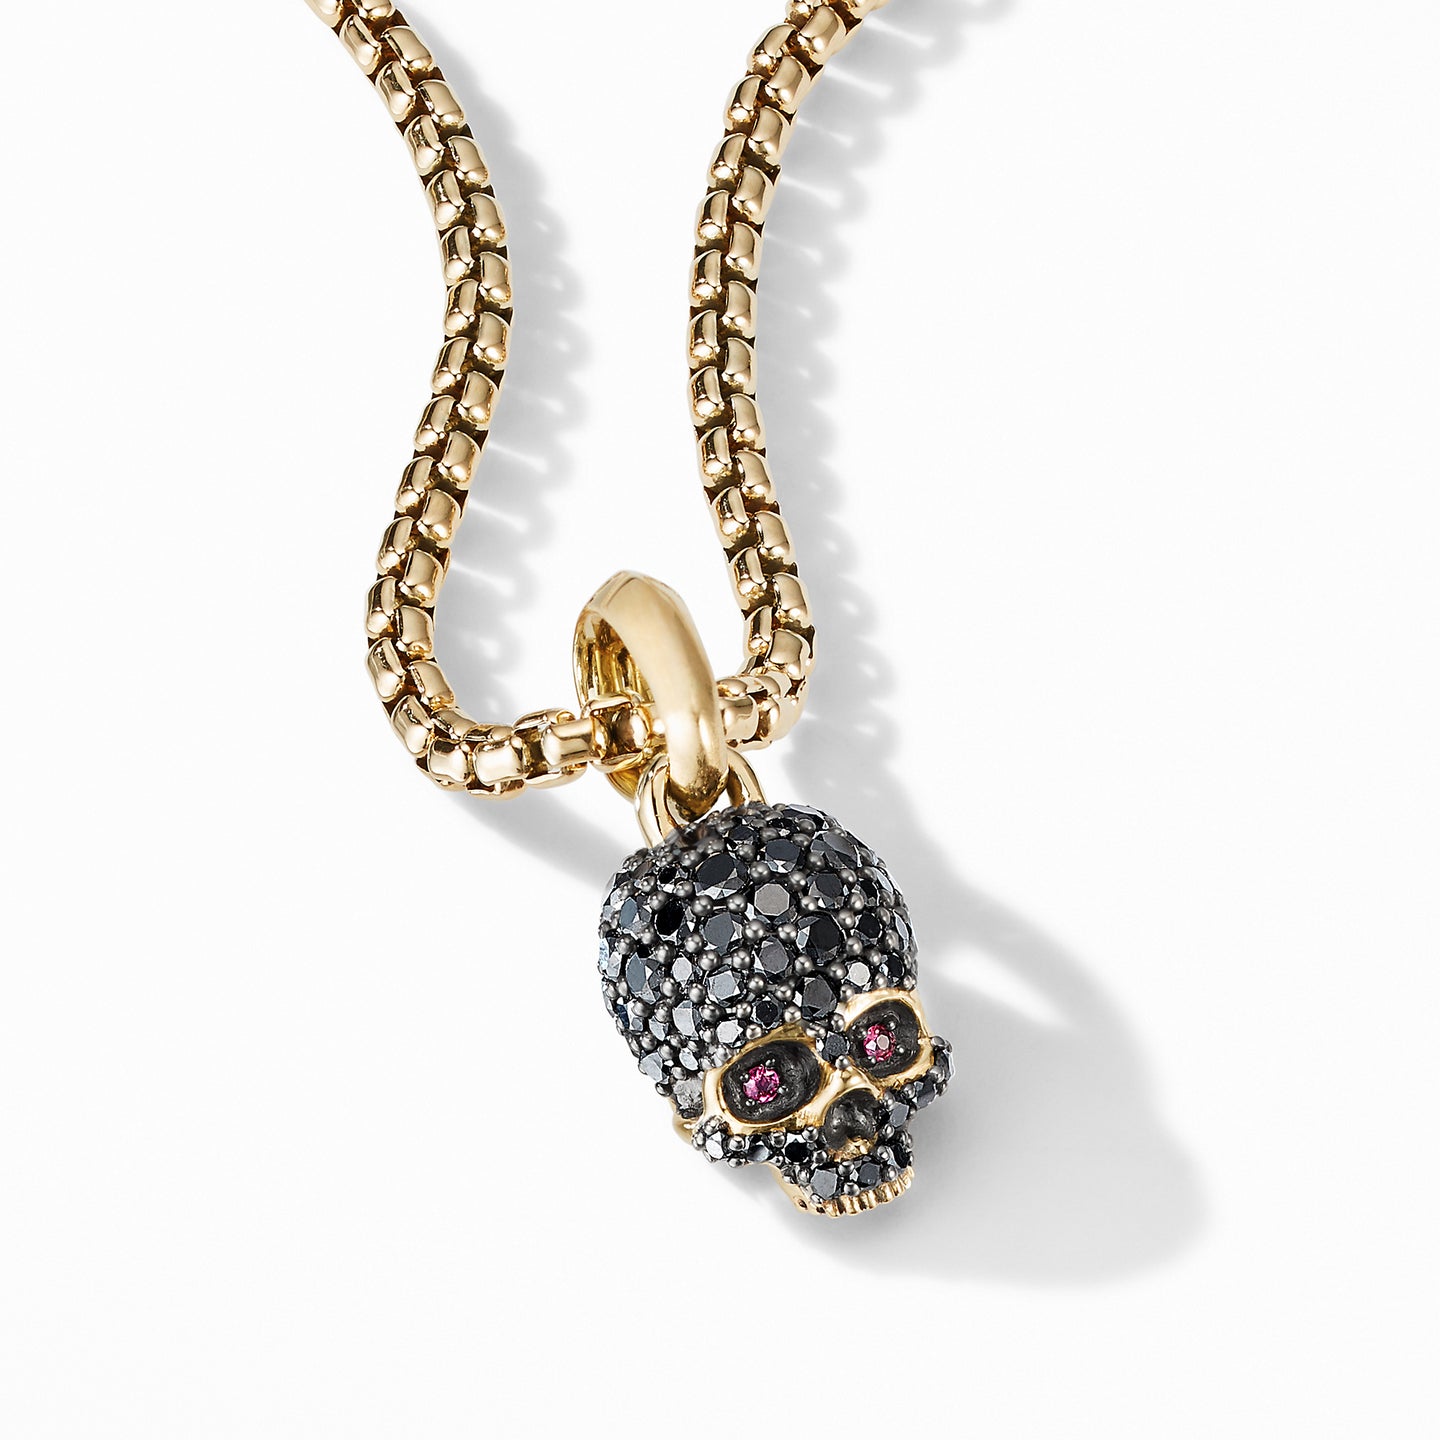 Skull Amulet with Full Pavé Black Diamonds, Rubies and 18K Yellow Gold